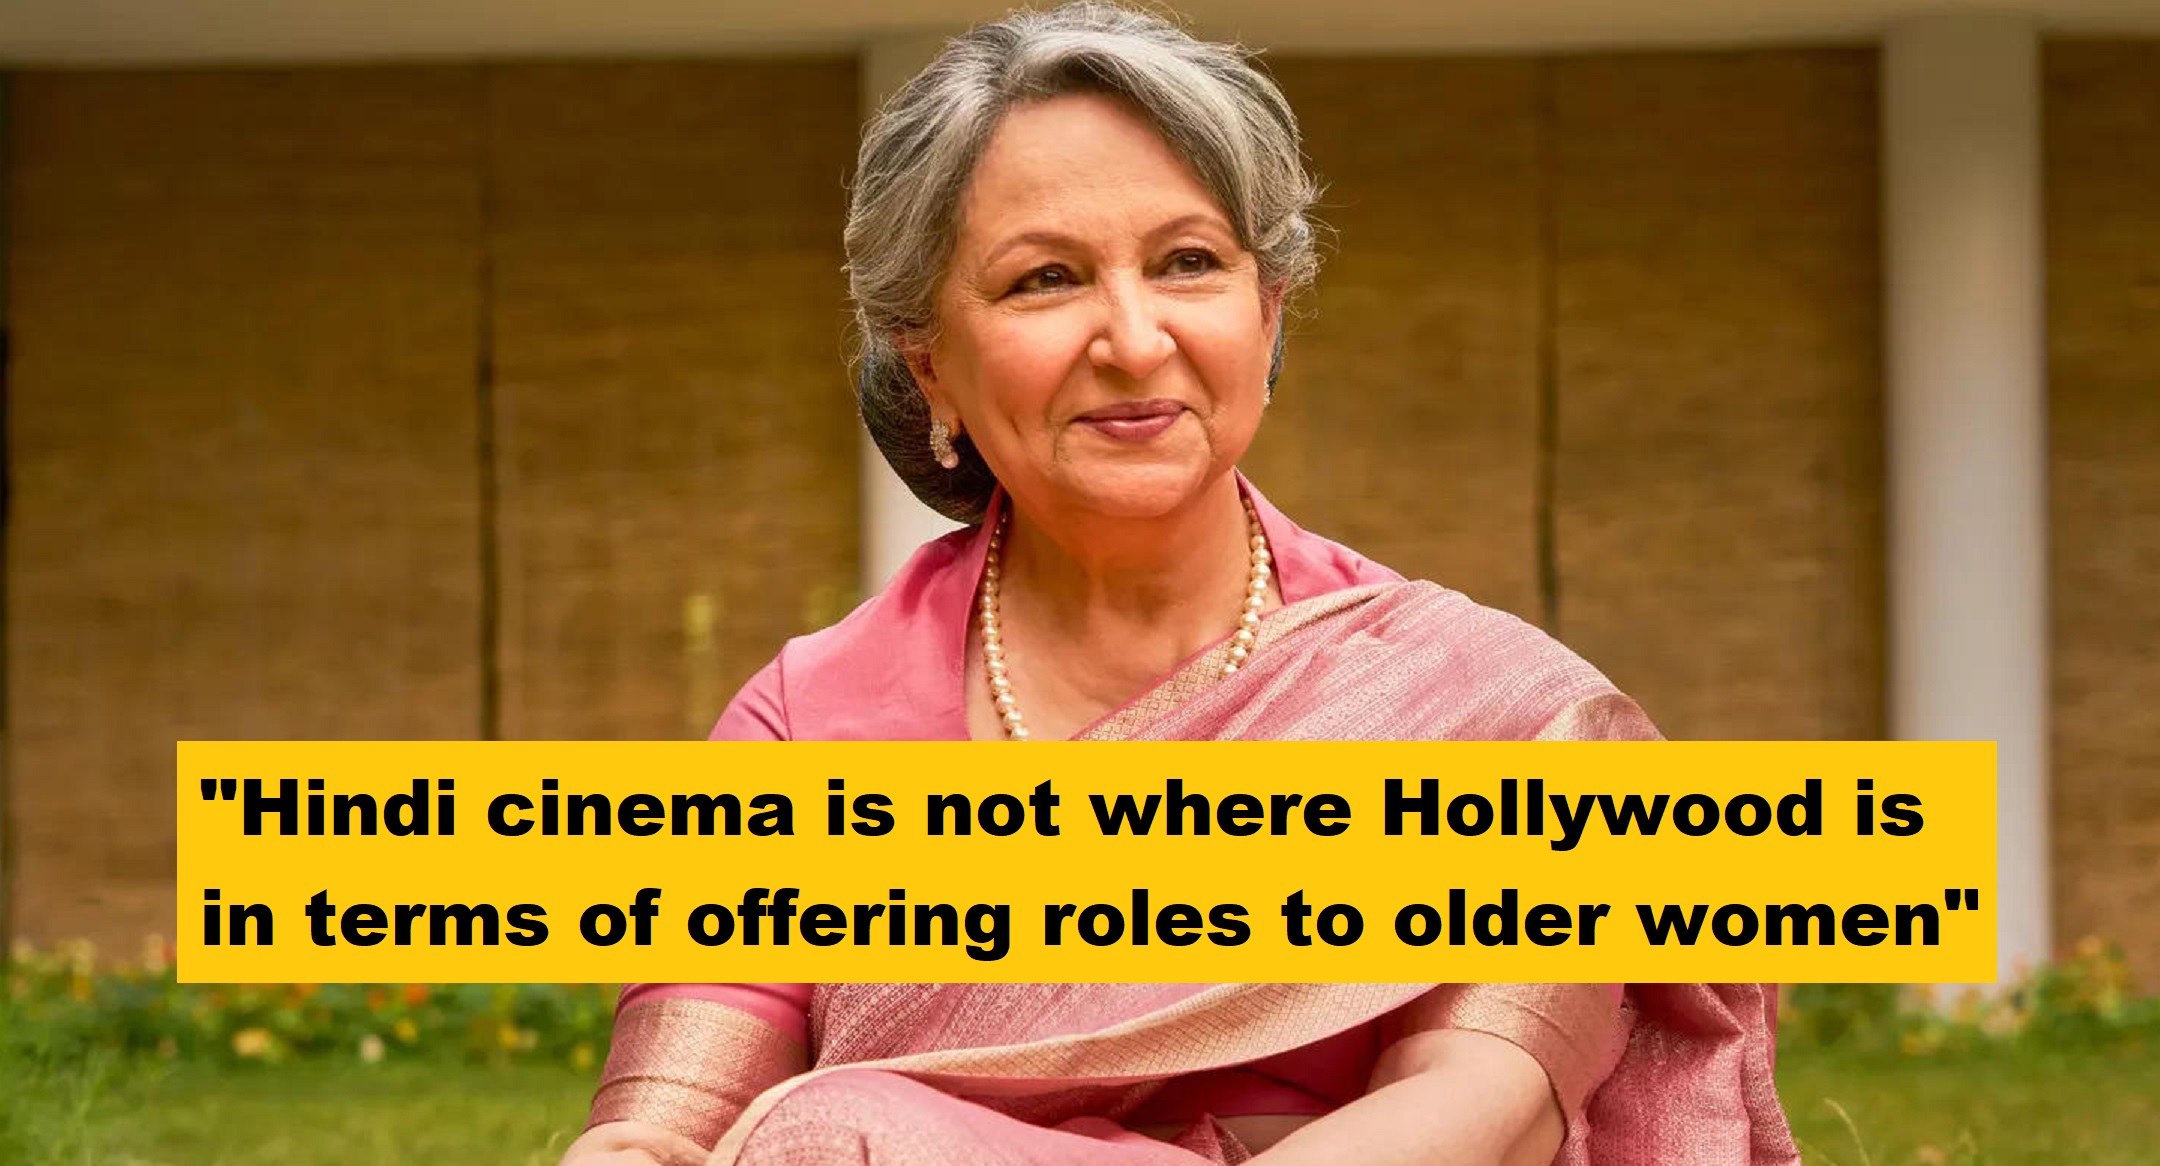 “All powerful roles go to Big B”, Sharmila Tagore Calls Film Industry ‘Ageist’